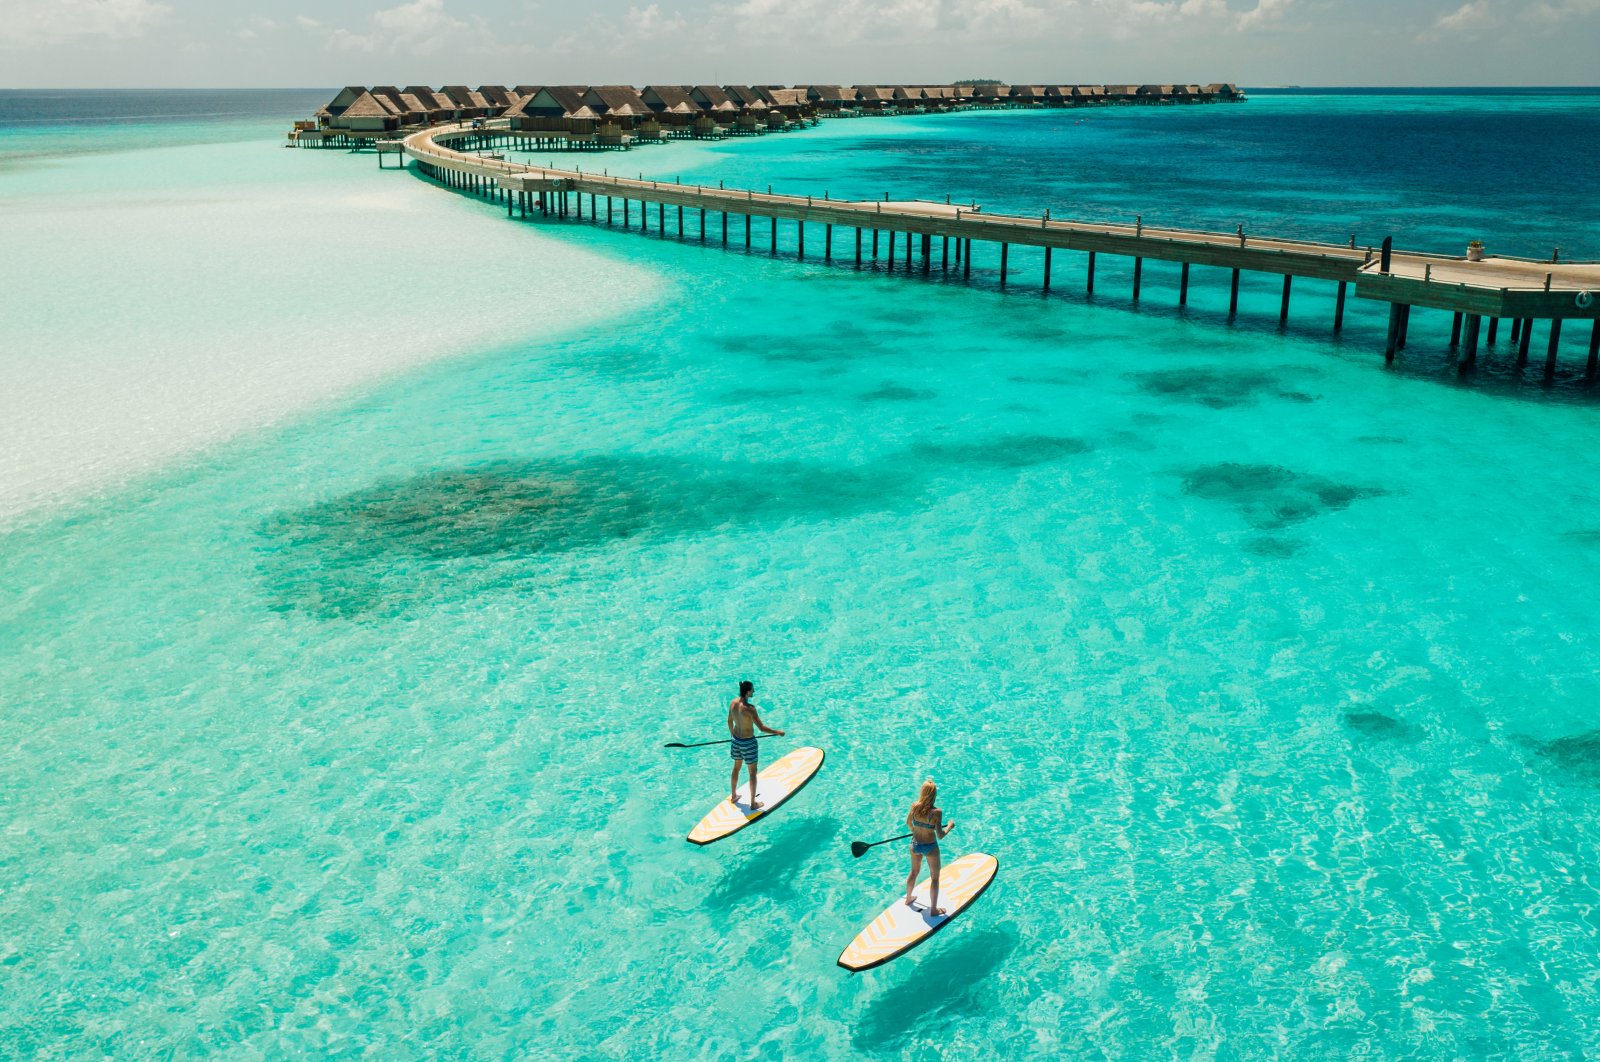 Pristine waters and silky smooth beaches, the Maldives is like a scene straight from paradise. (Photo courtesy of Joali Maldives)